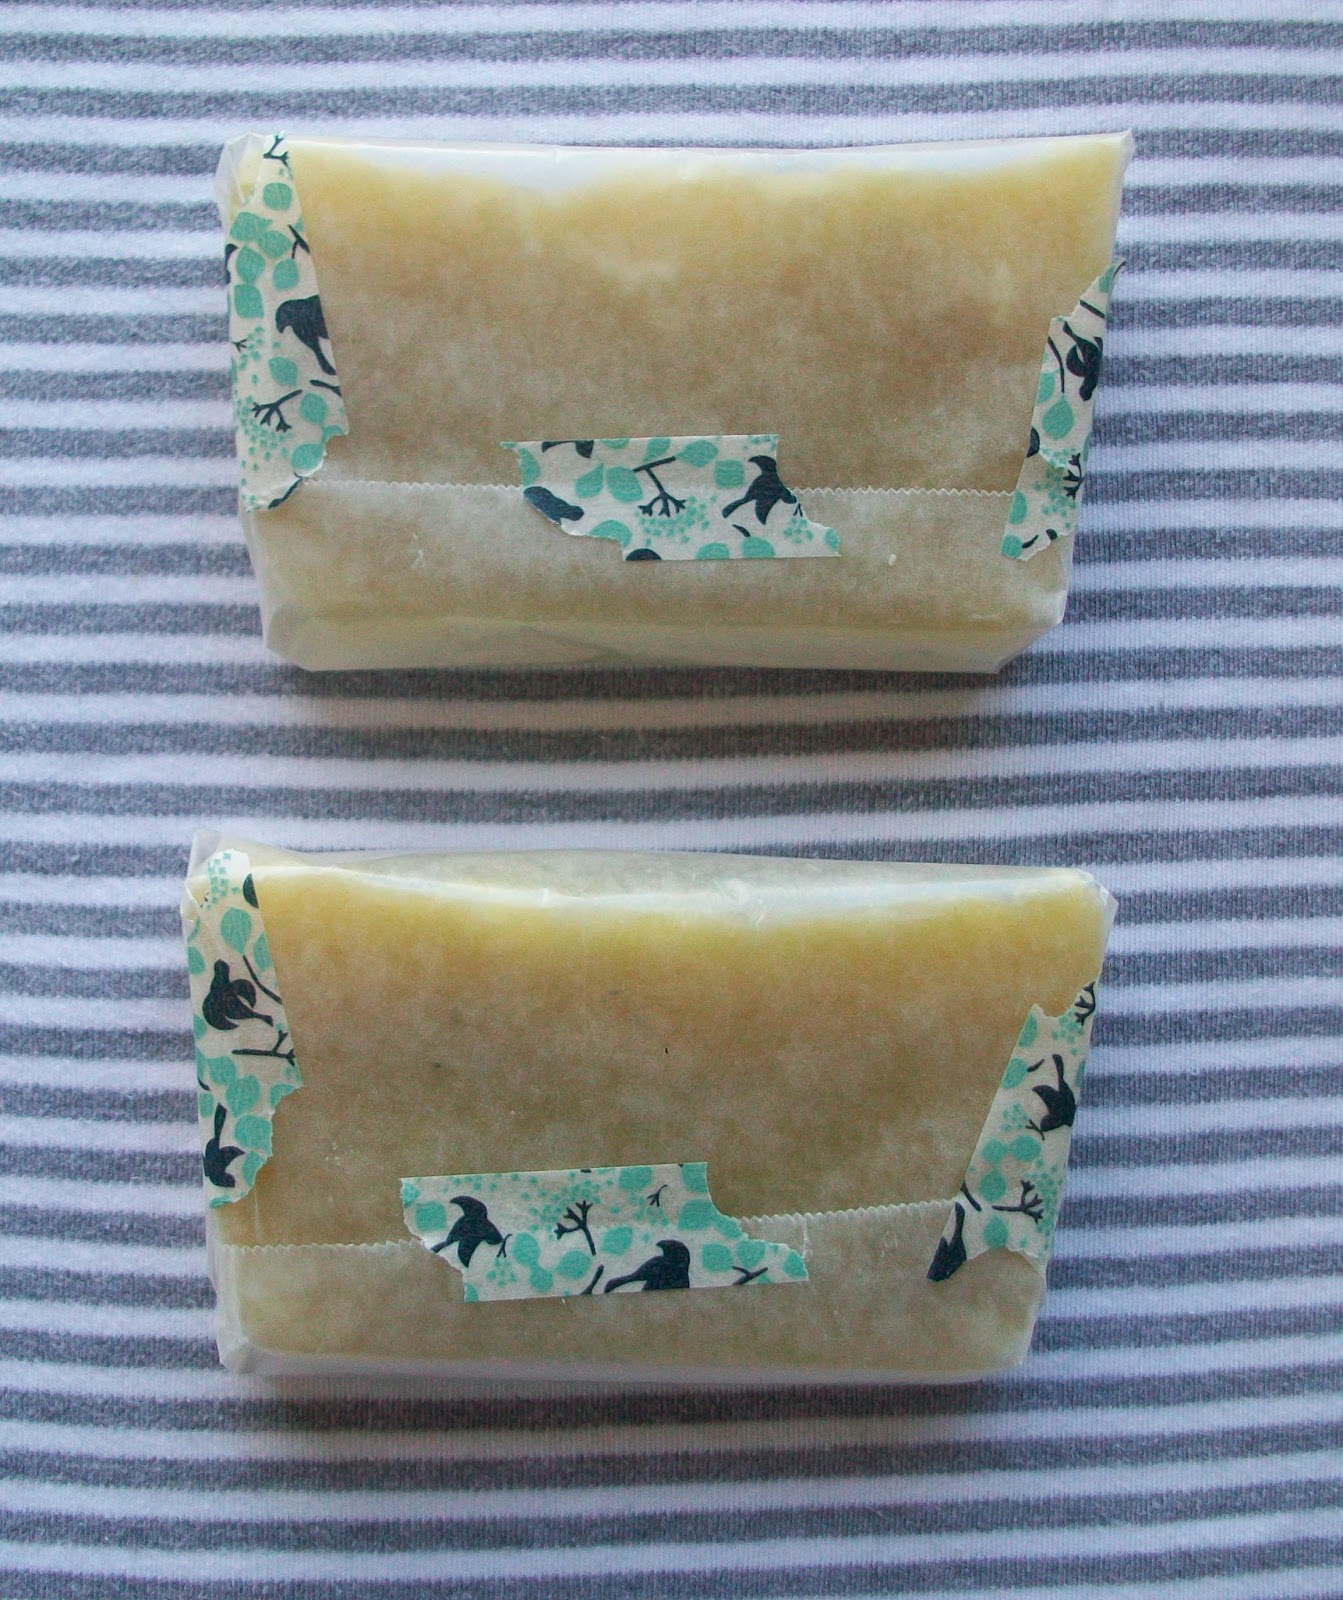 Cut wax paper to size, wrap soap like a package, and secure with washi ...